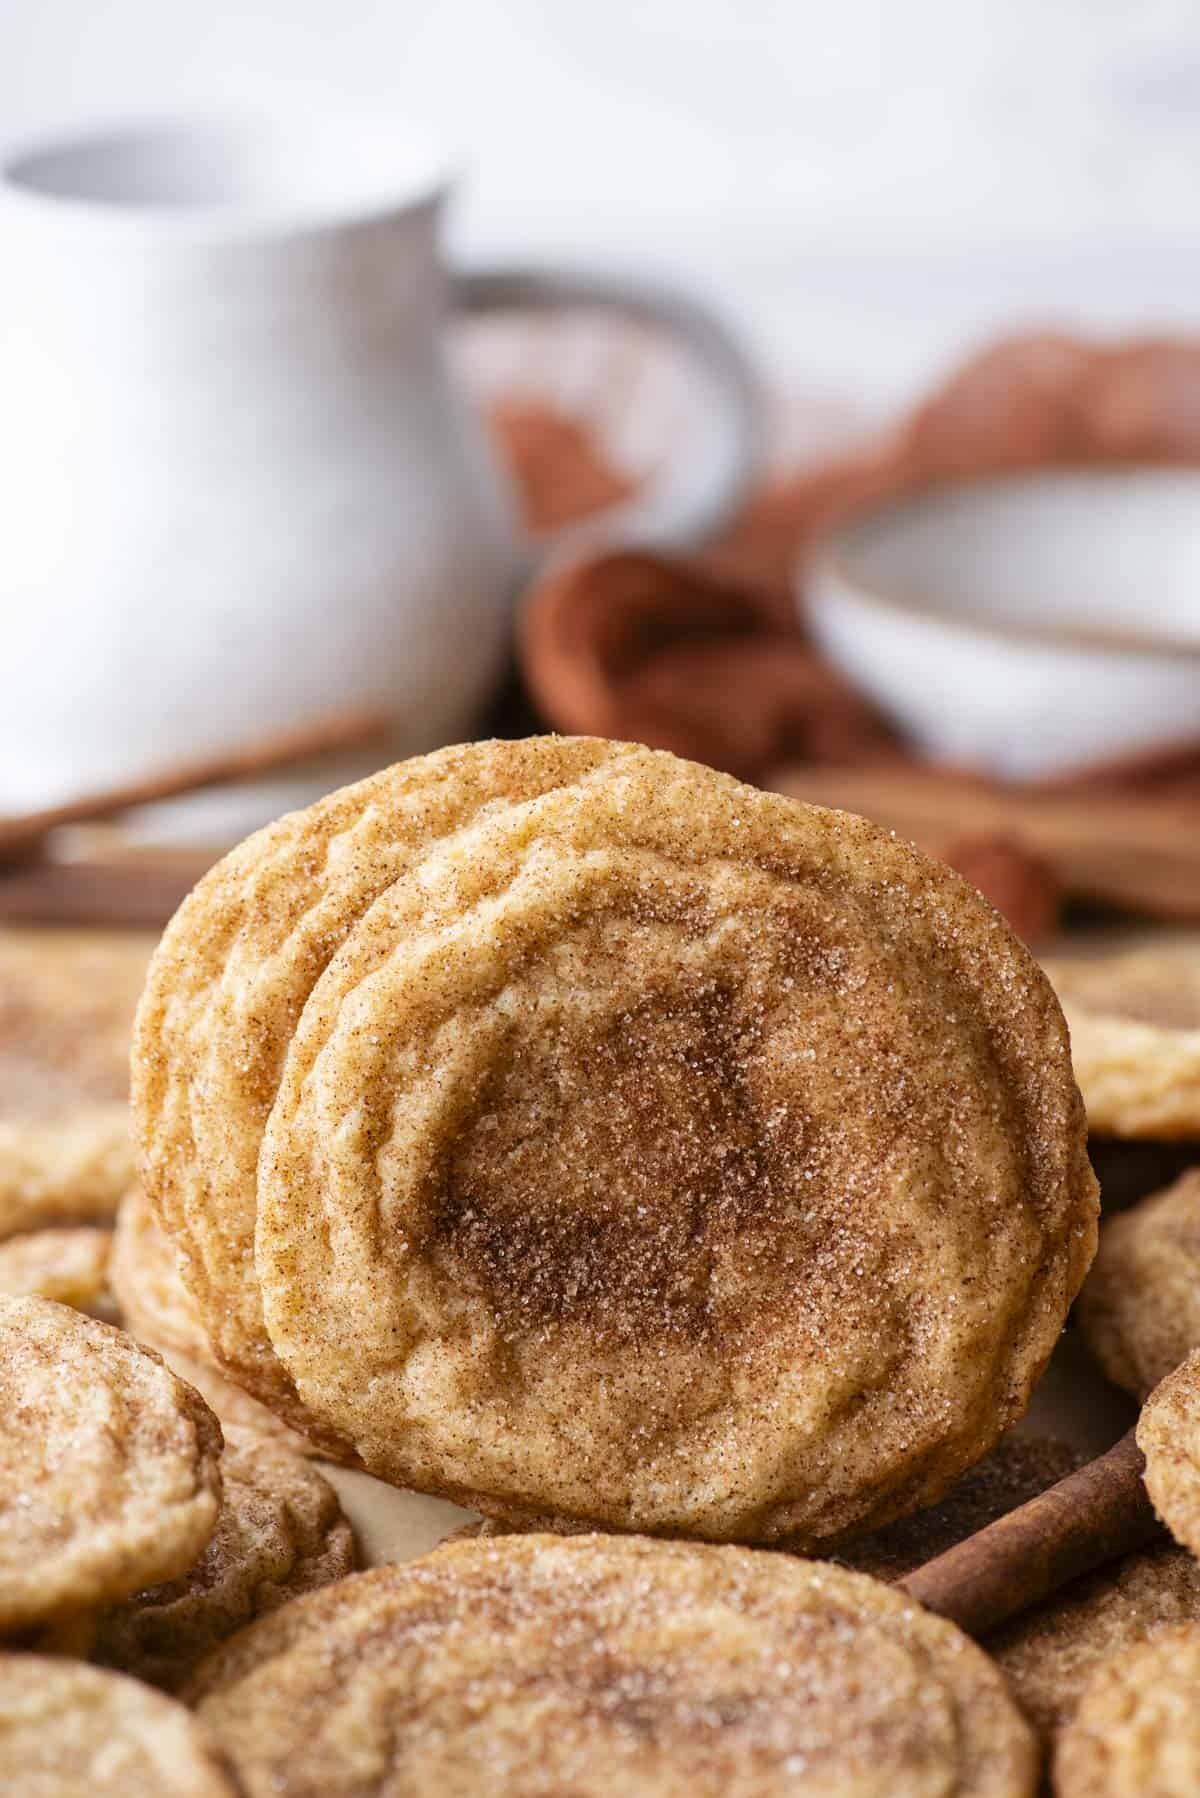 a snickerdoodle cookie standing straight up on its side surrounded by more cookies laying flat and a cinnamon stick, with a white cup of milk and bowl in the background